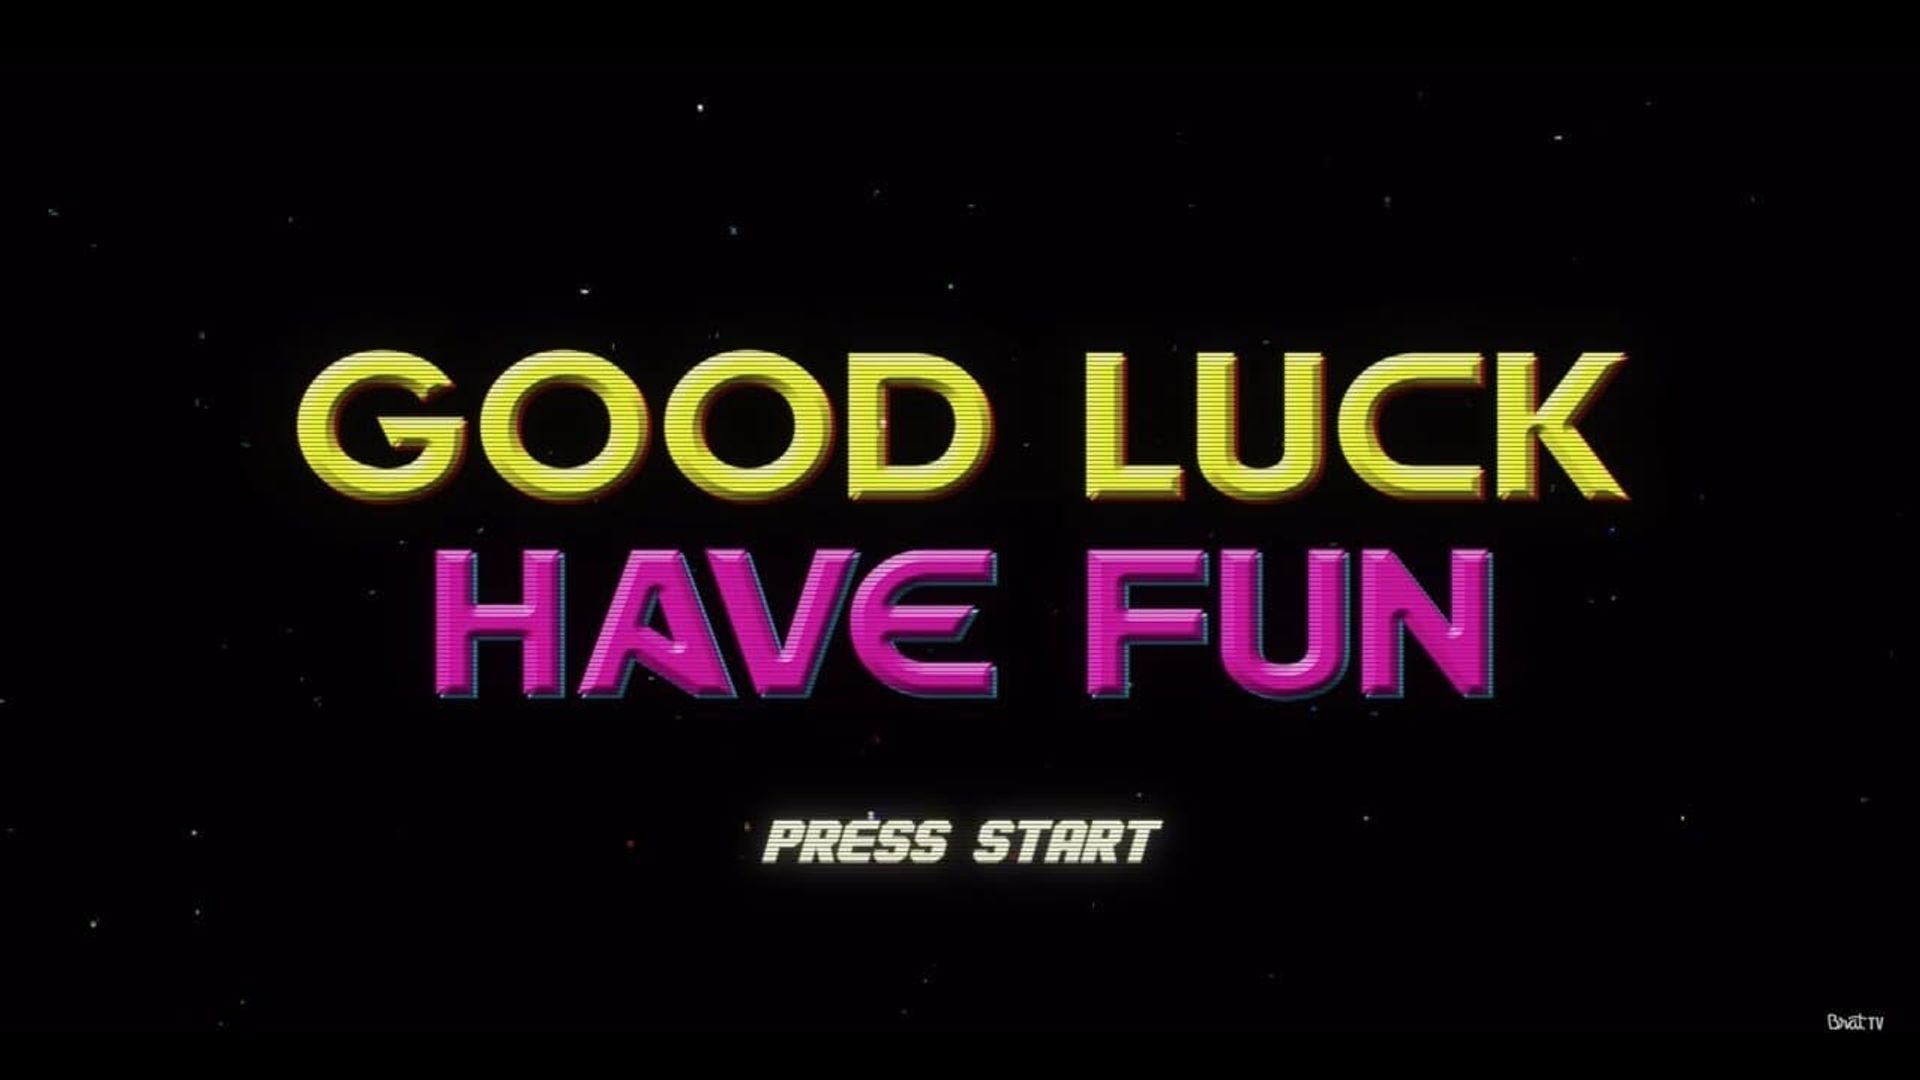 Good Luck Have Fun background